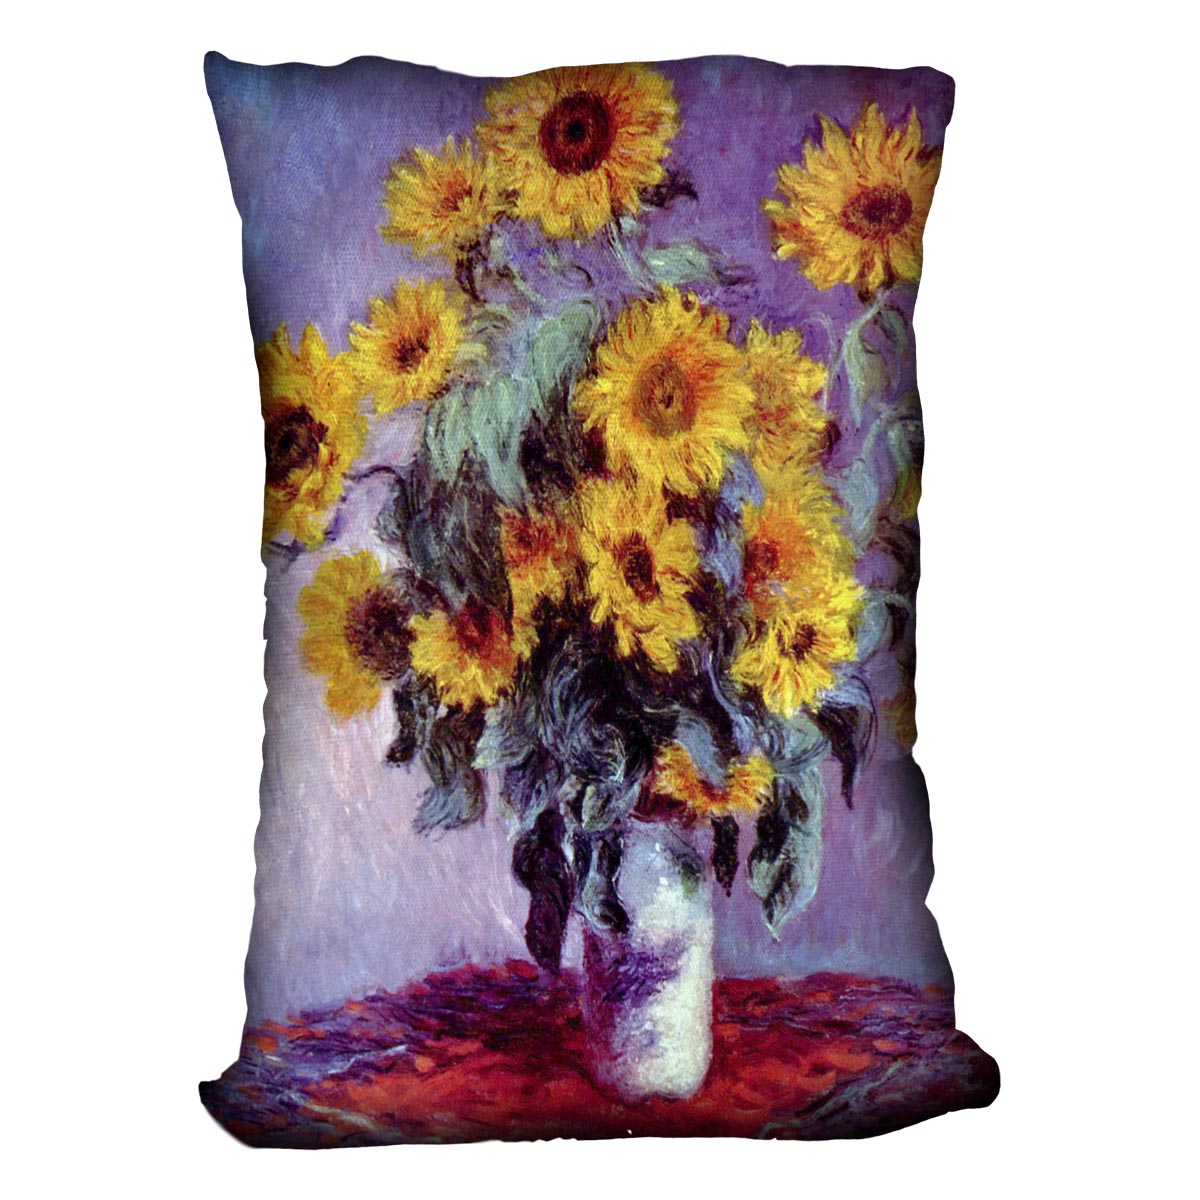 Still Life with Sunflowers by Monet Cushion